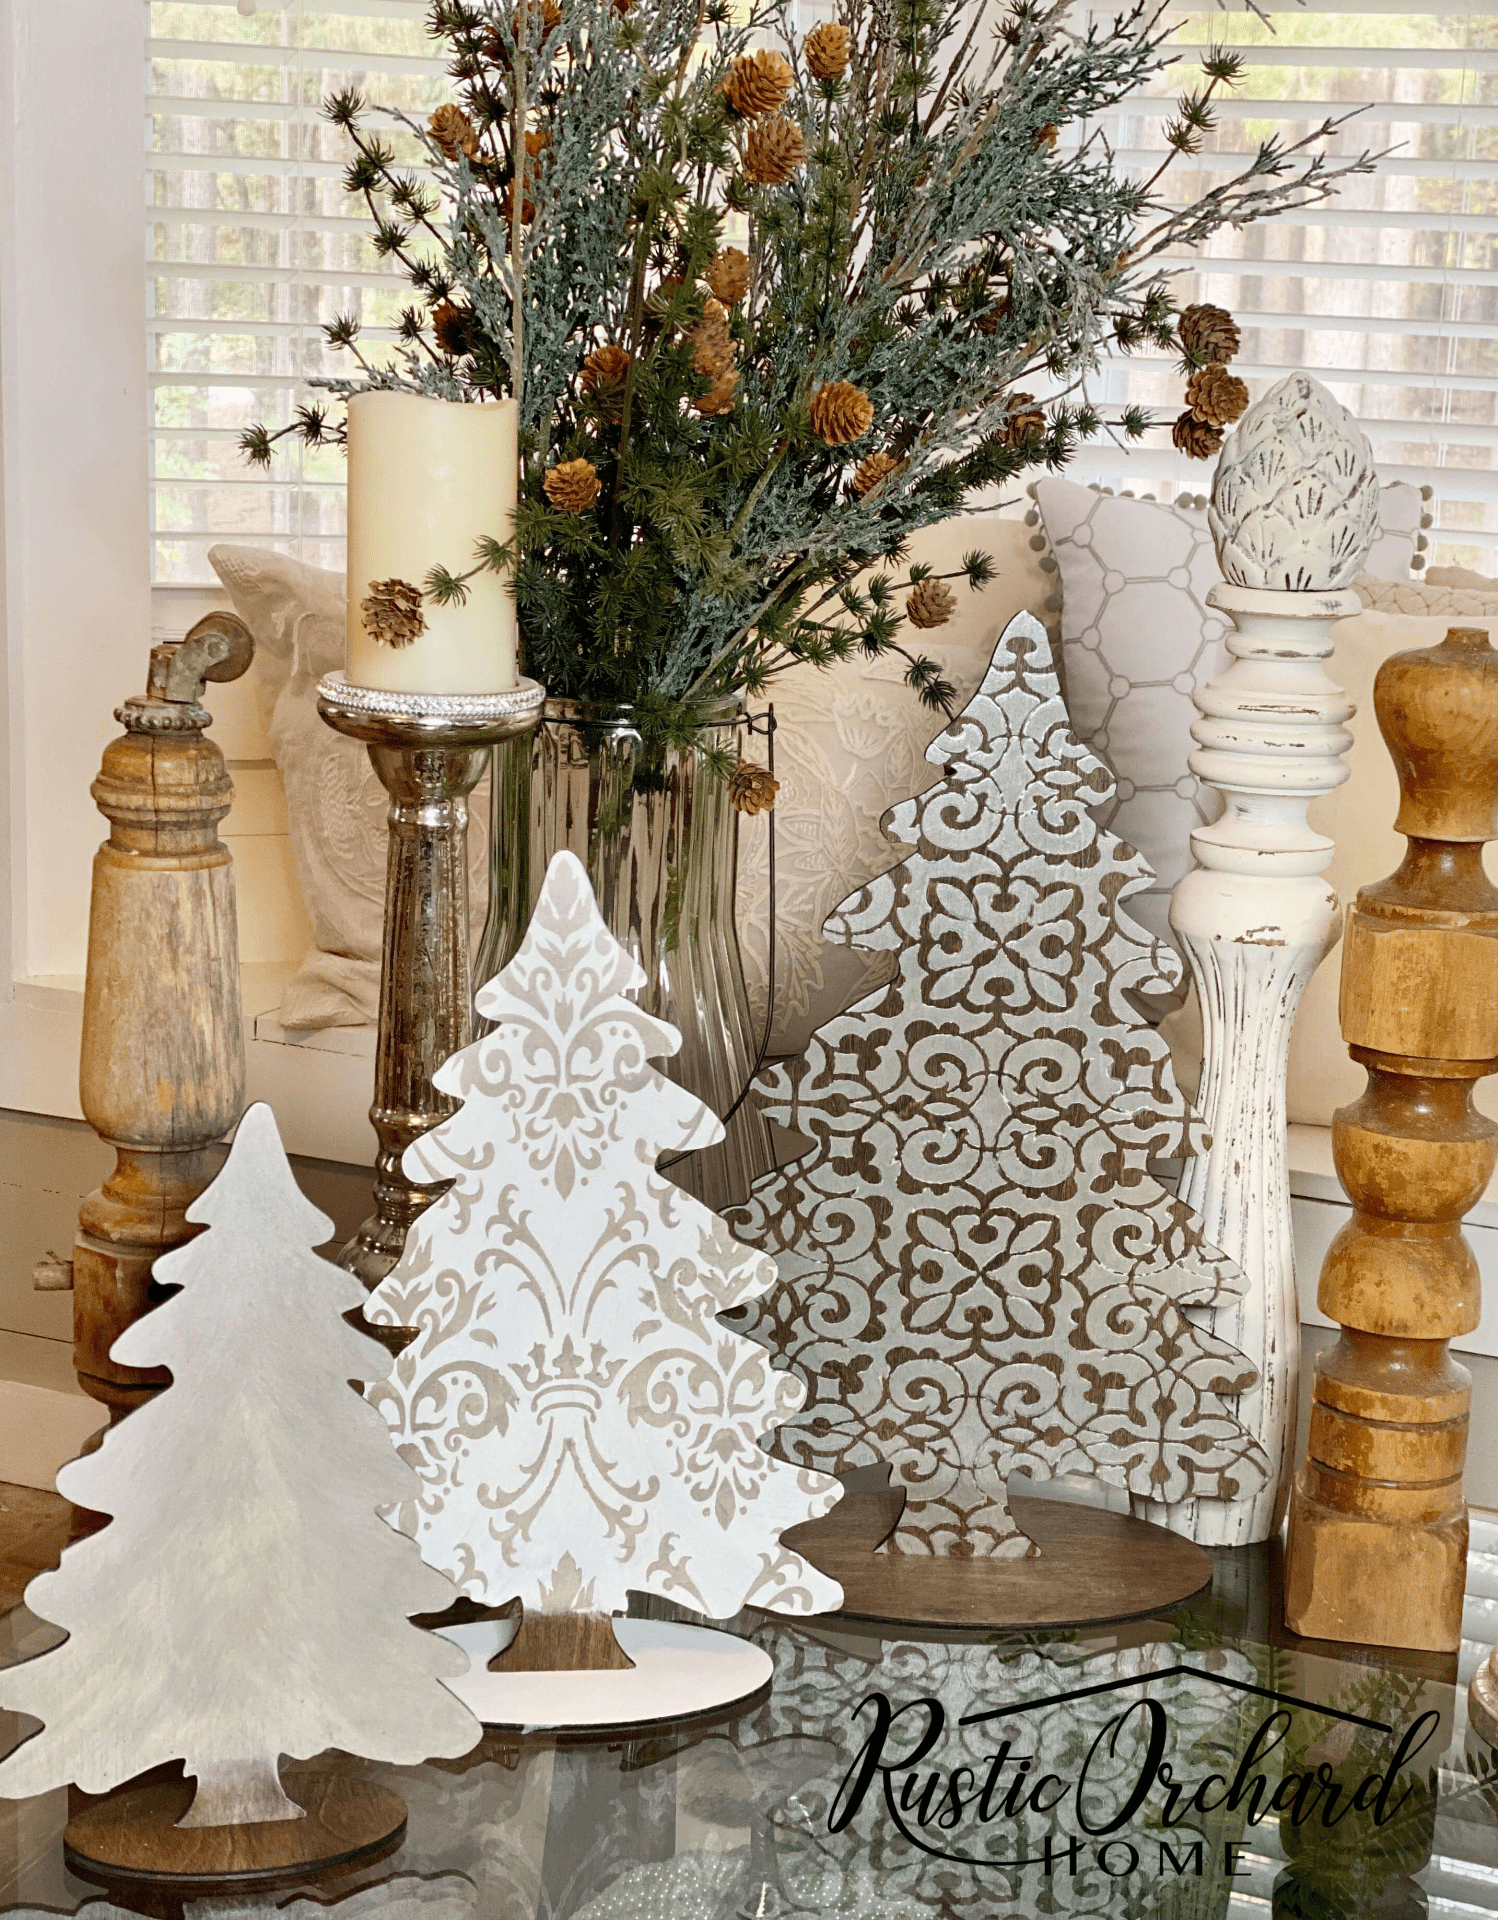 Stenciled Wooden Christmas Trees